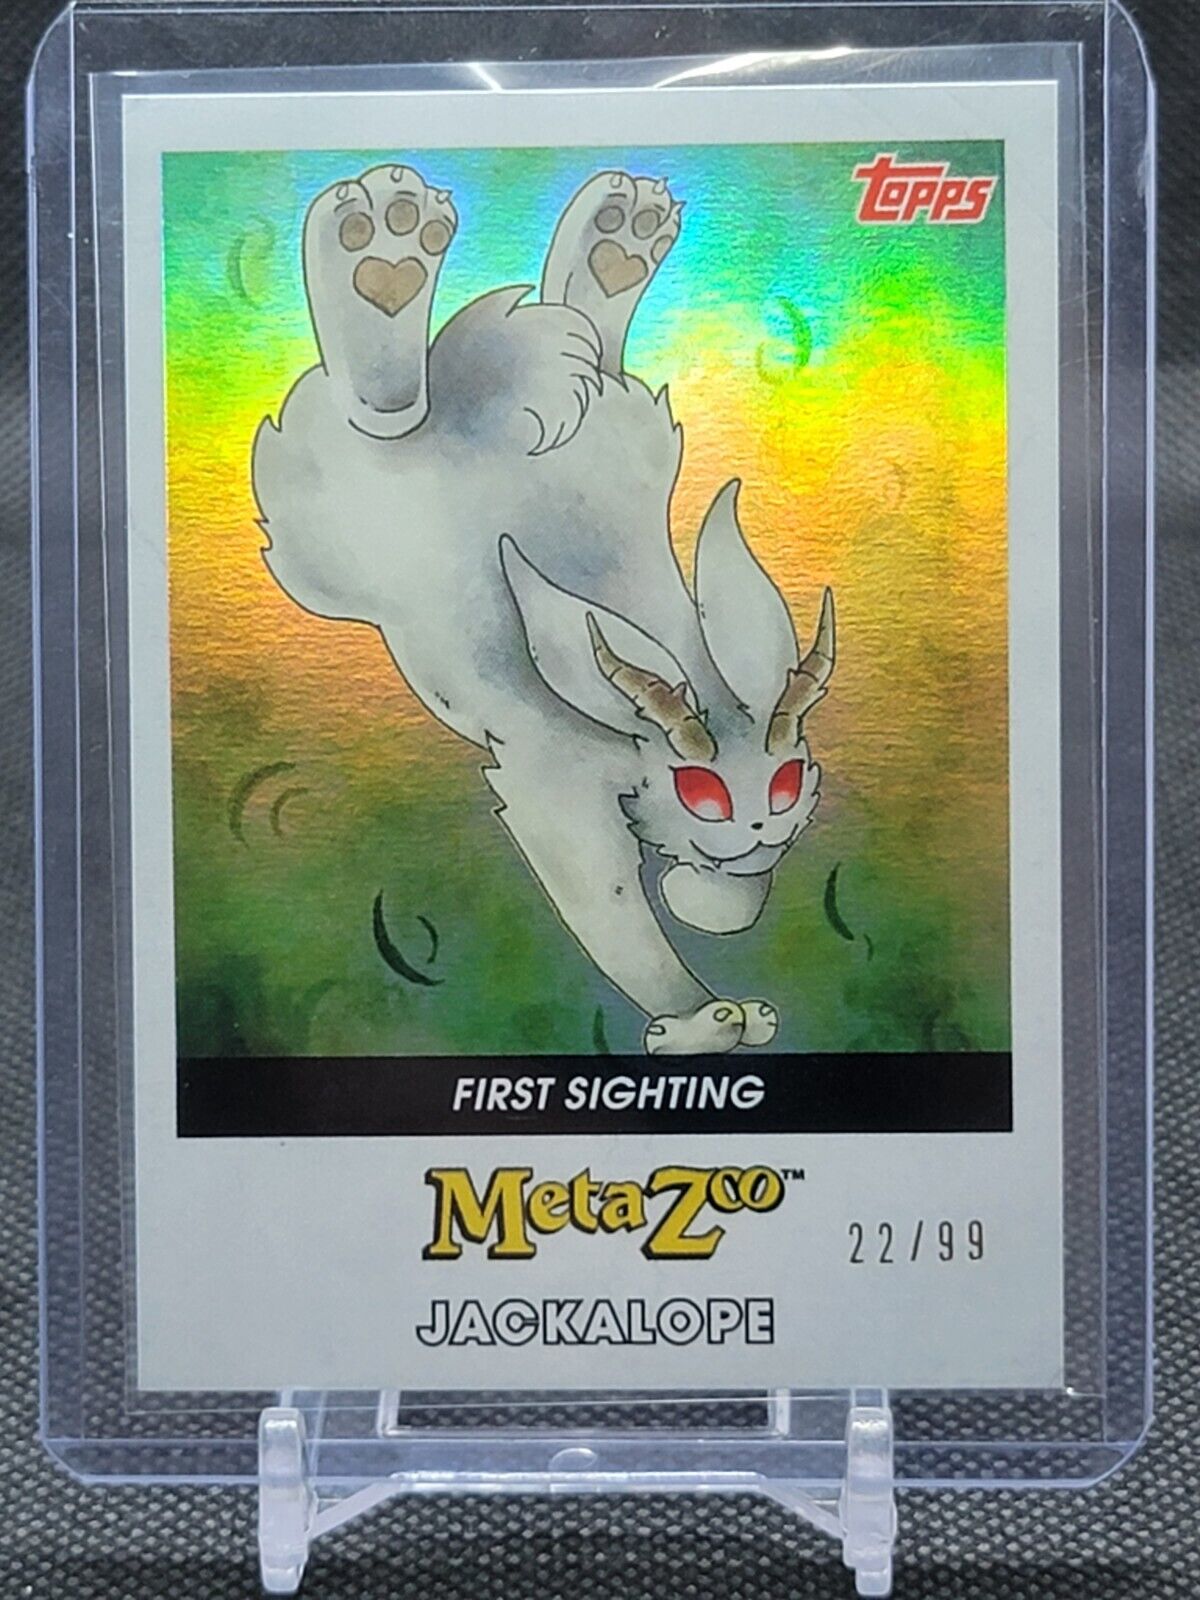 2022 Topps Metazoo Wilderness First Sighting Card #30-F Jackalope 22/99